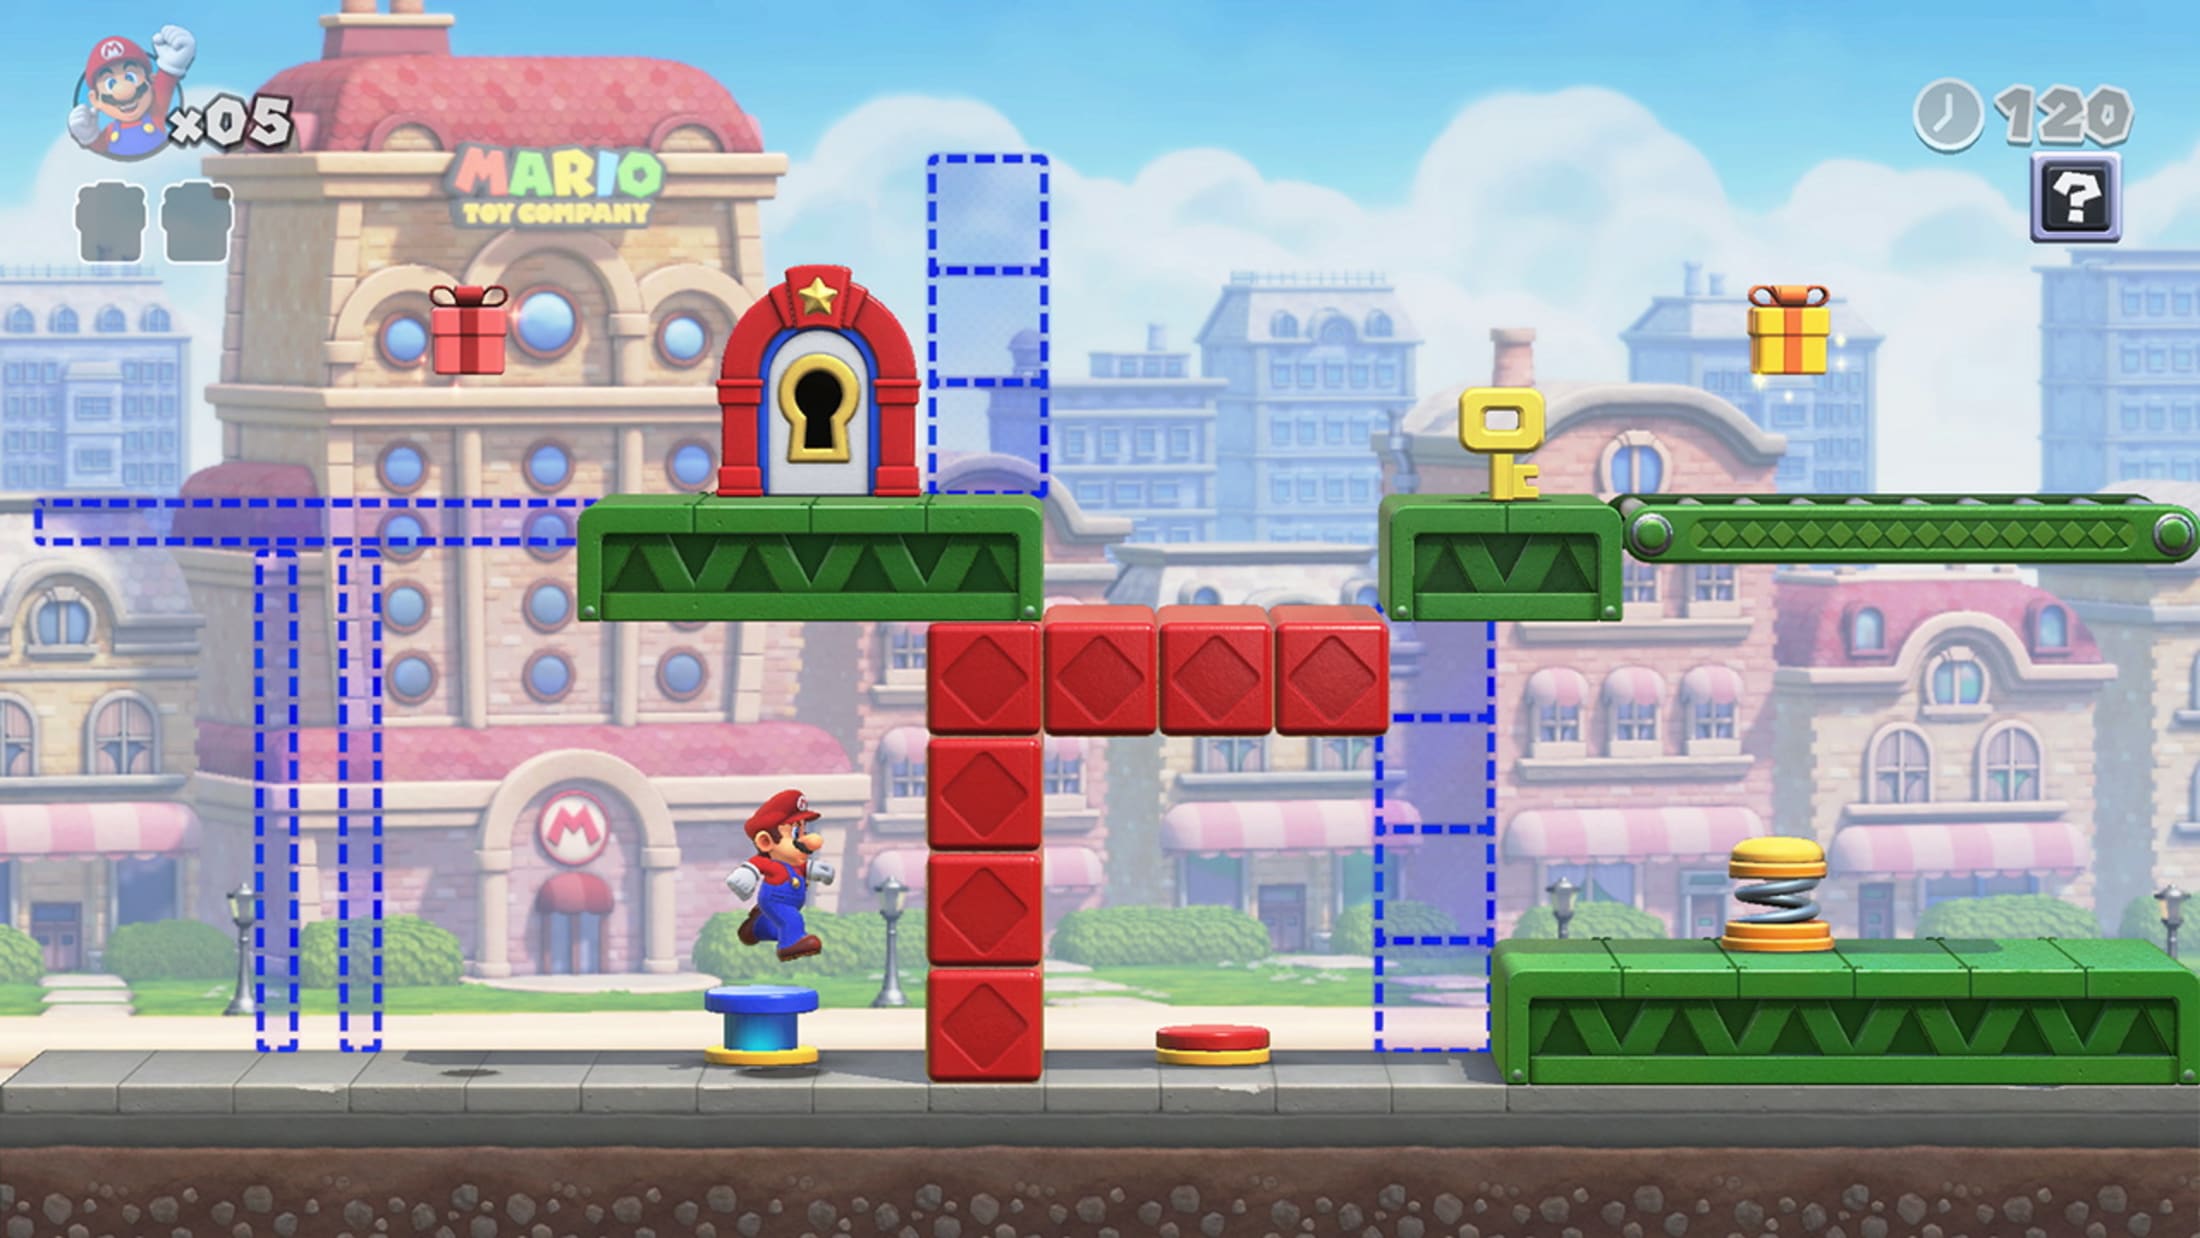 Classic Style shows a level timer in the top-right corner